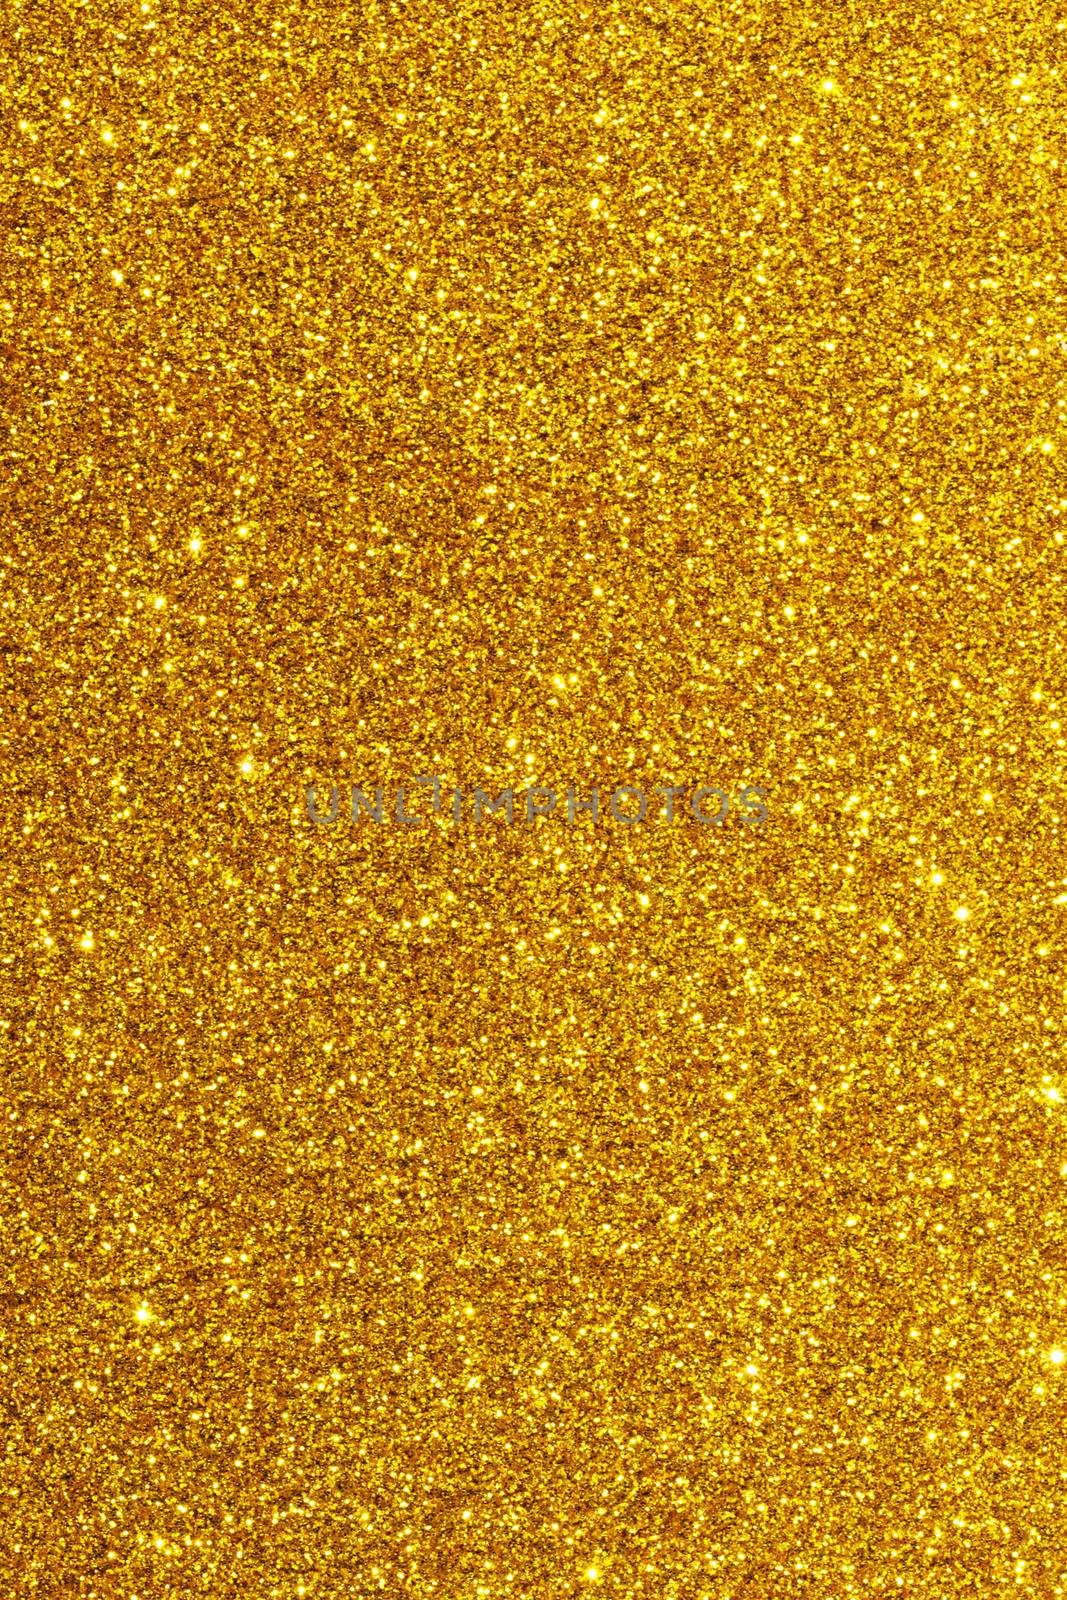 Shiny golden bokeh glitter lights abstract background, Christmas New Year party celebration concept